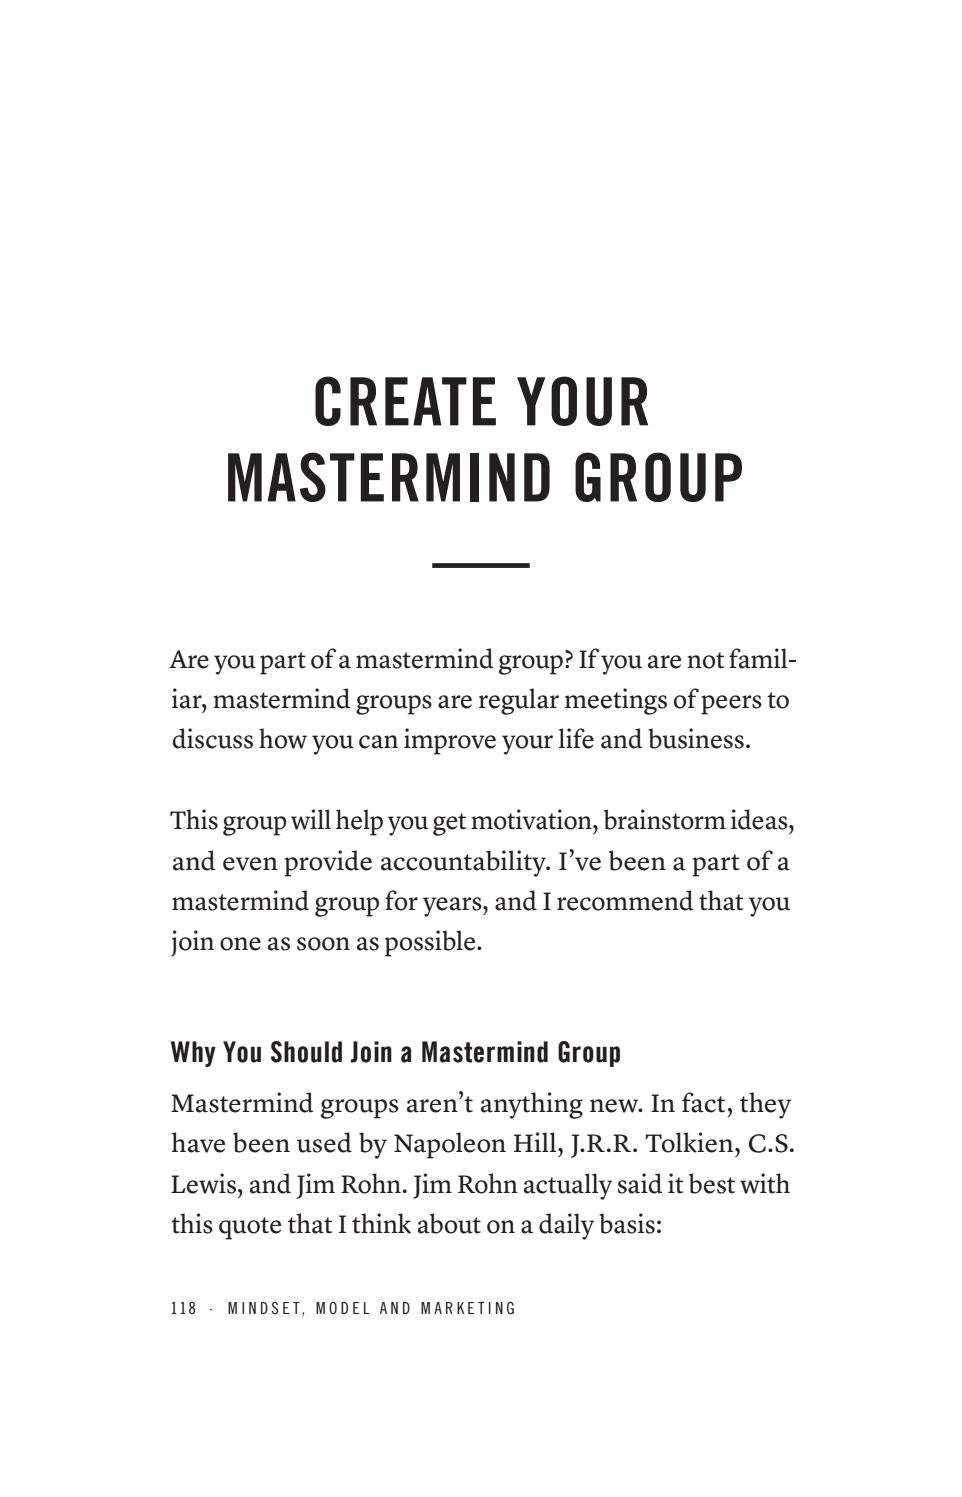 Detail Quotes About Mastermind Groups Nomer 31